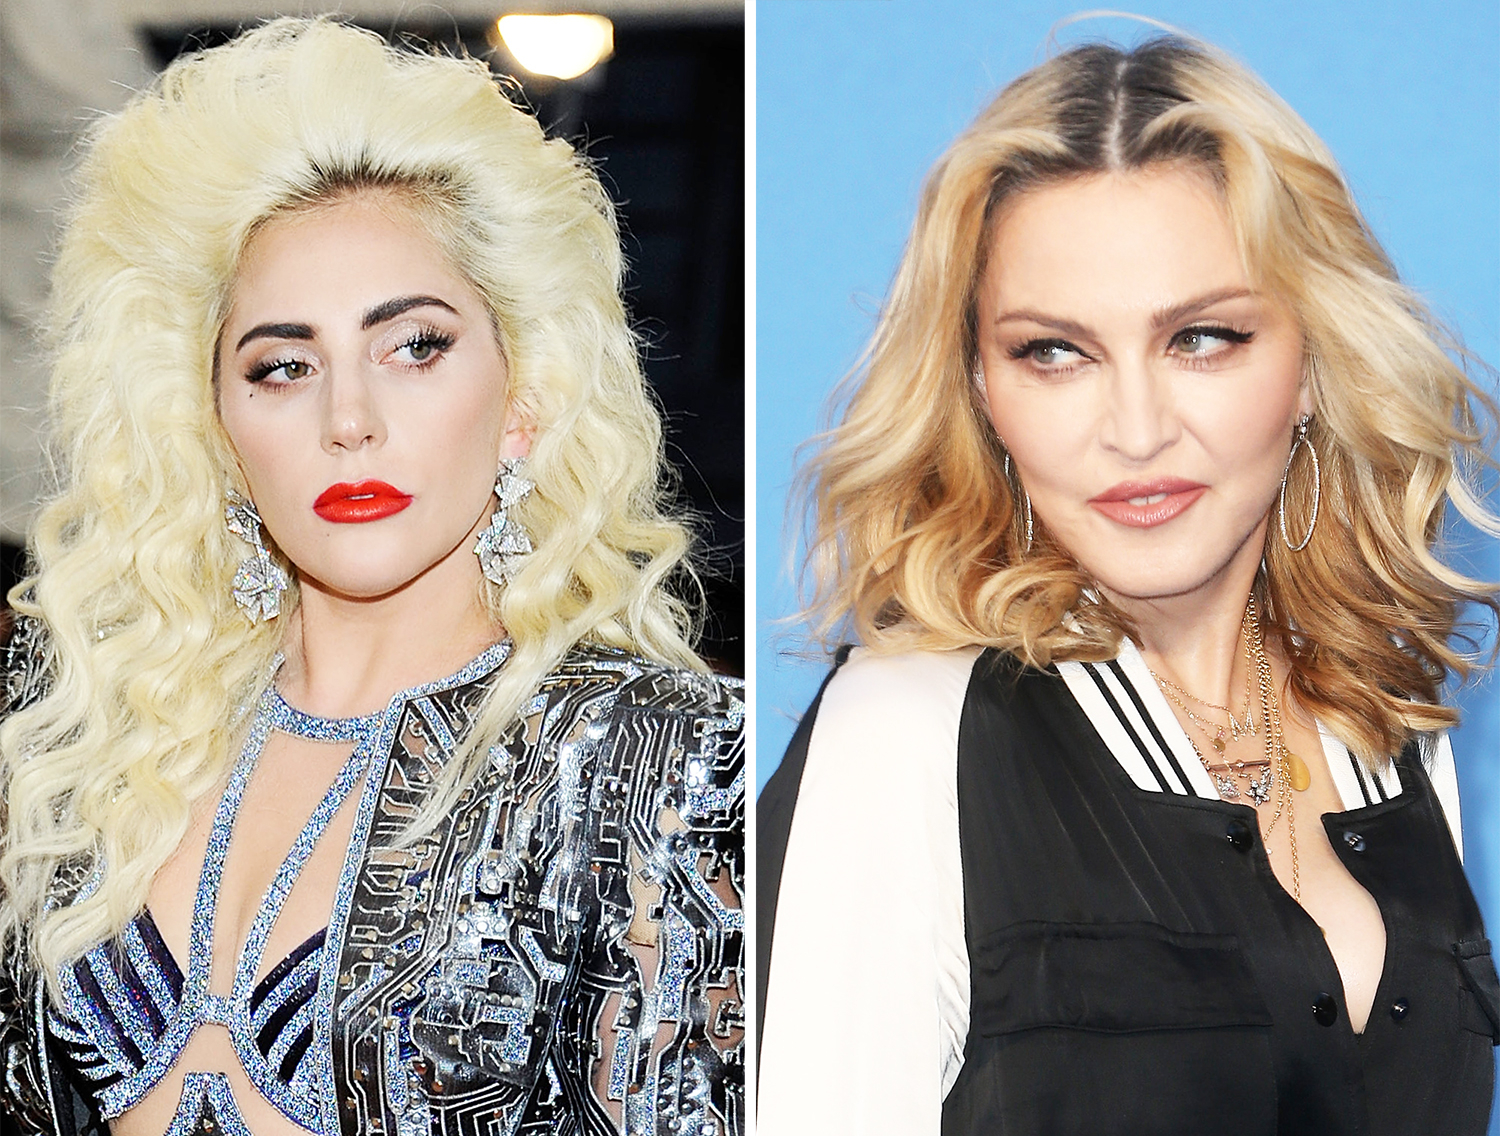 Lady Gaga Reignites Madonna Feud: ‘We’re Very Different’